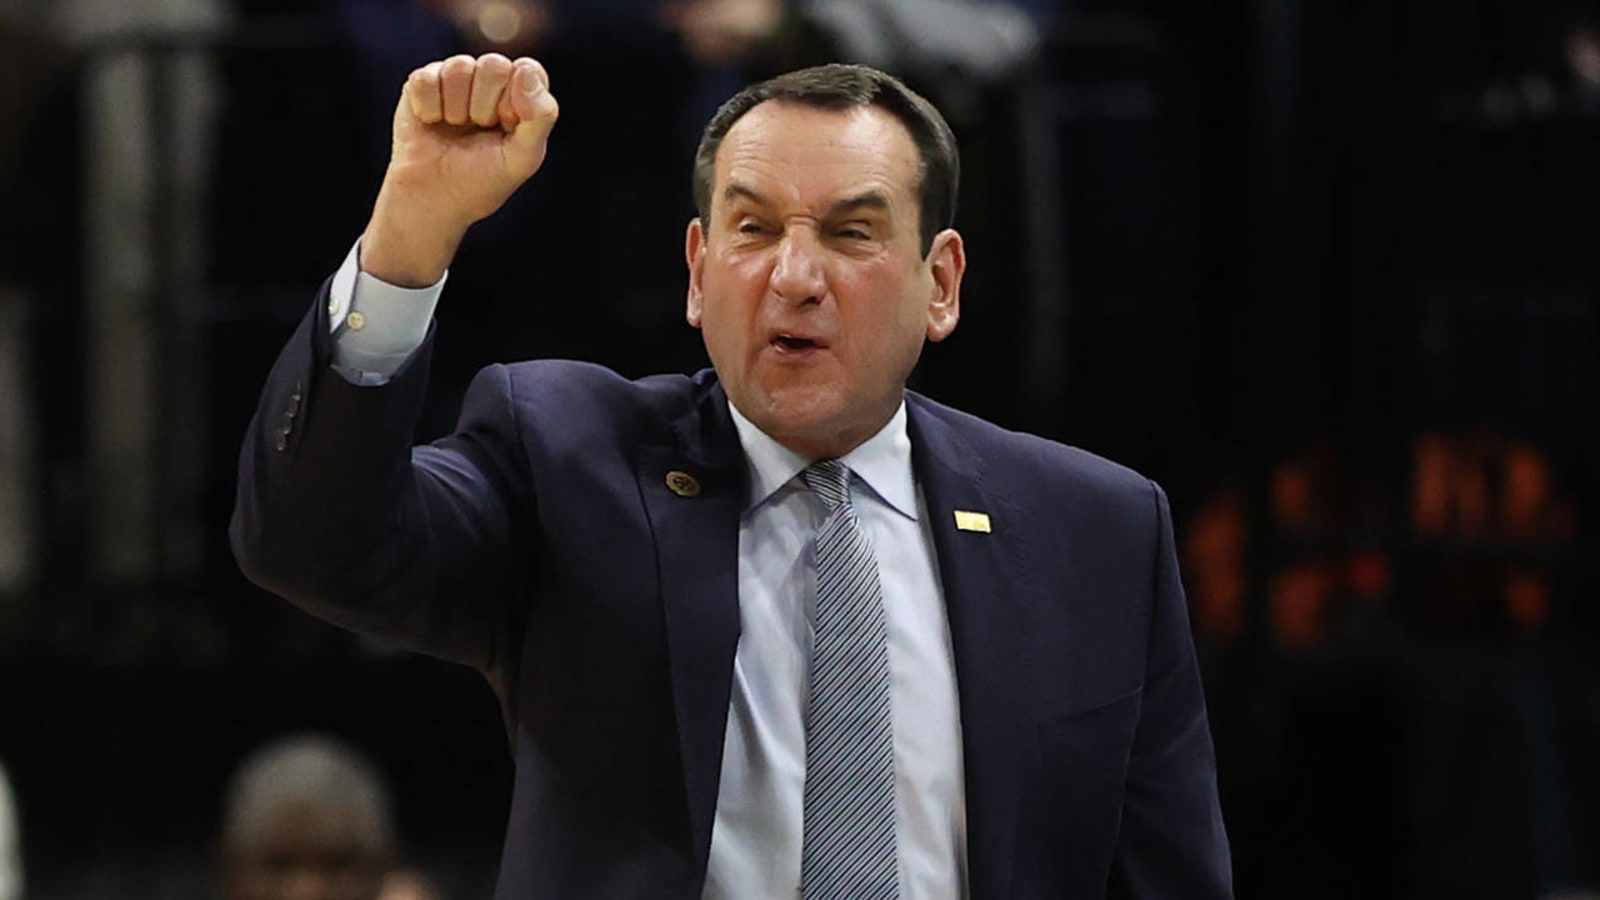 Student reporter responds to Coach K controversy